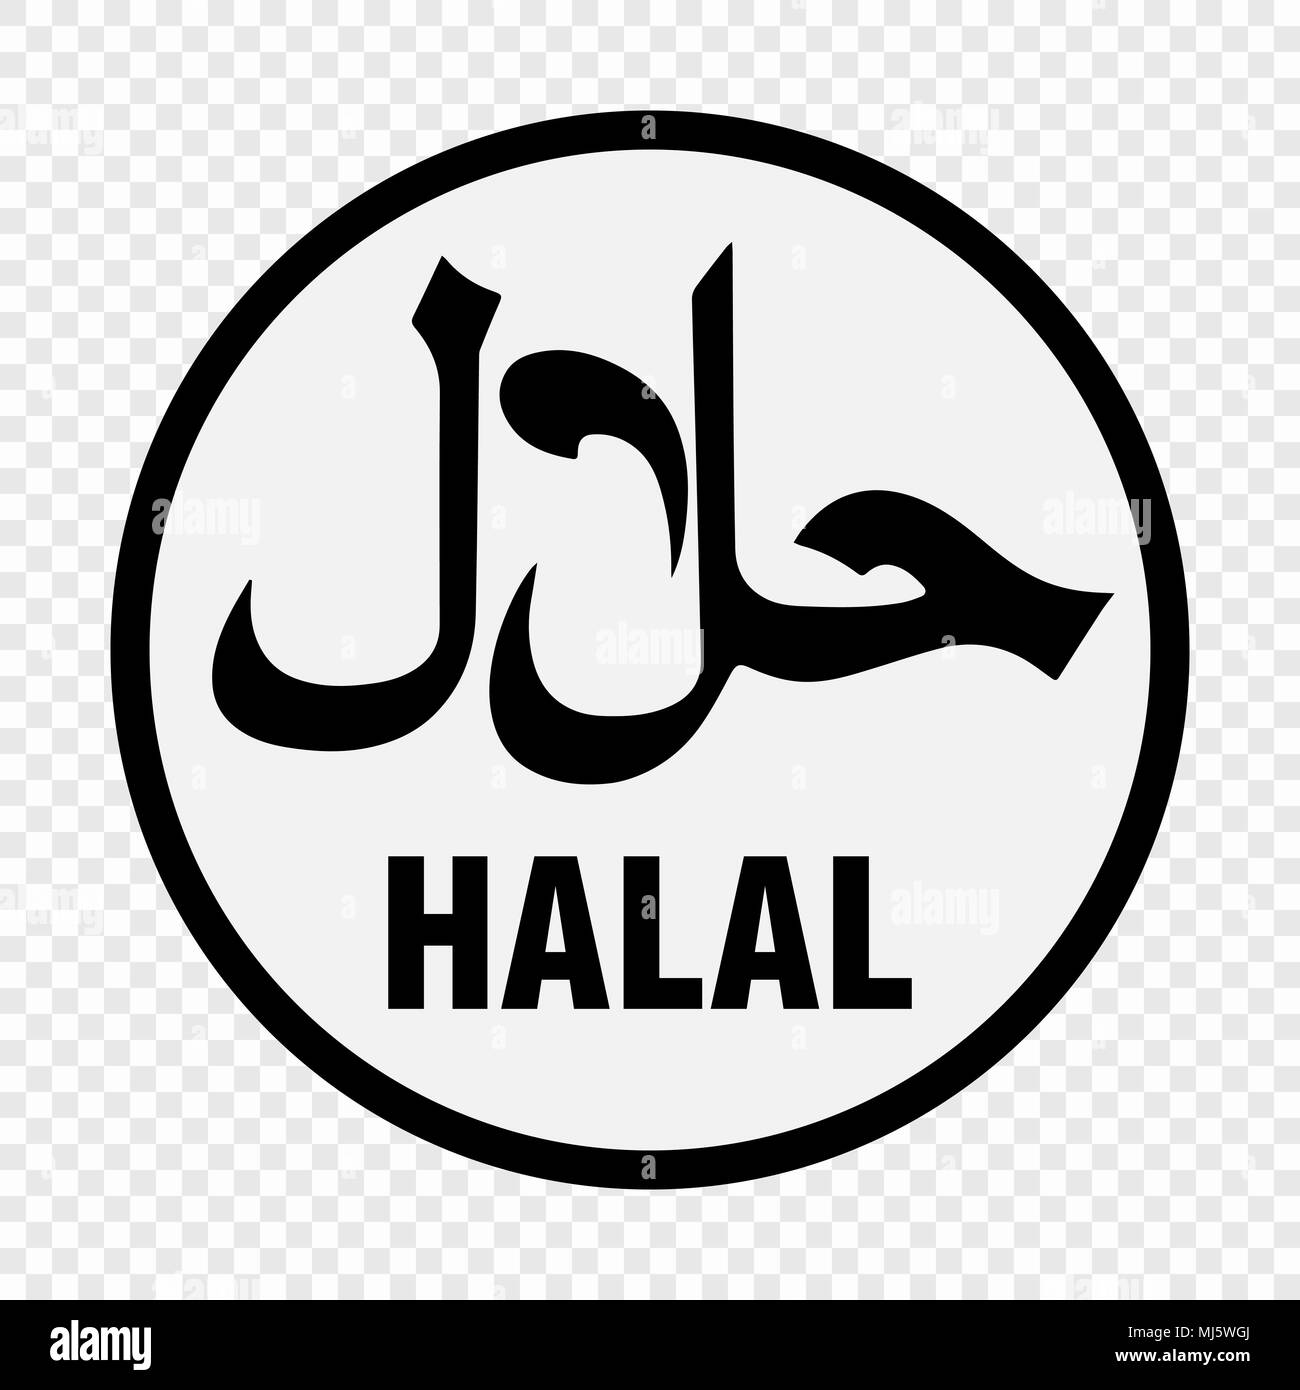 Halal logo vector. Food product dietary label for apps Stock Vector